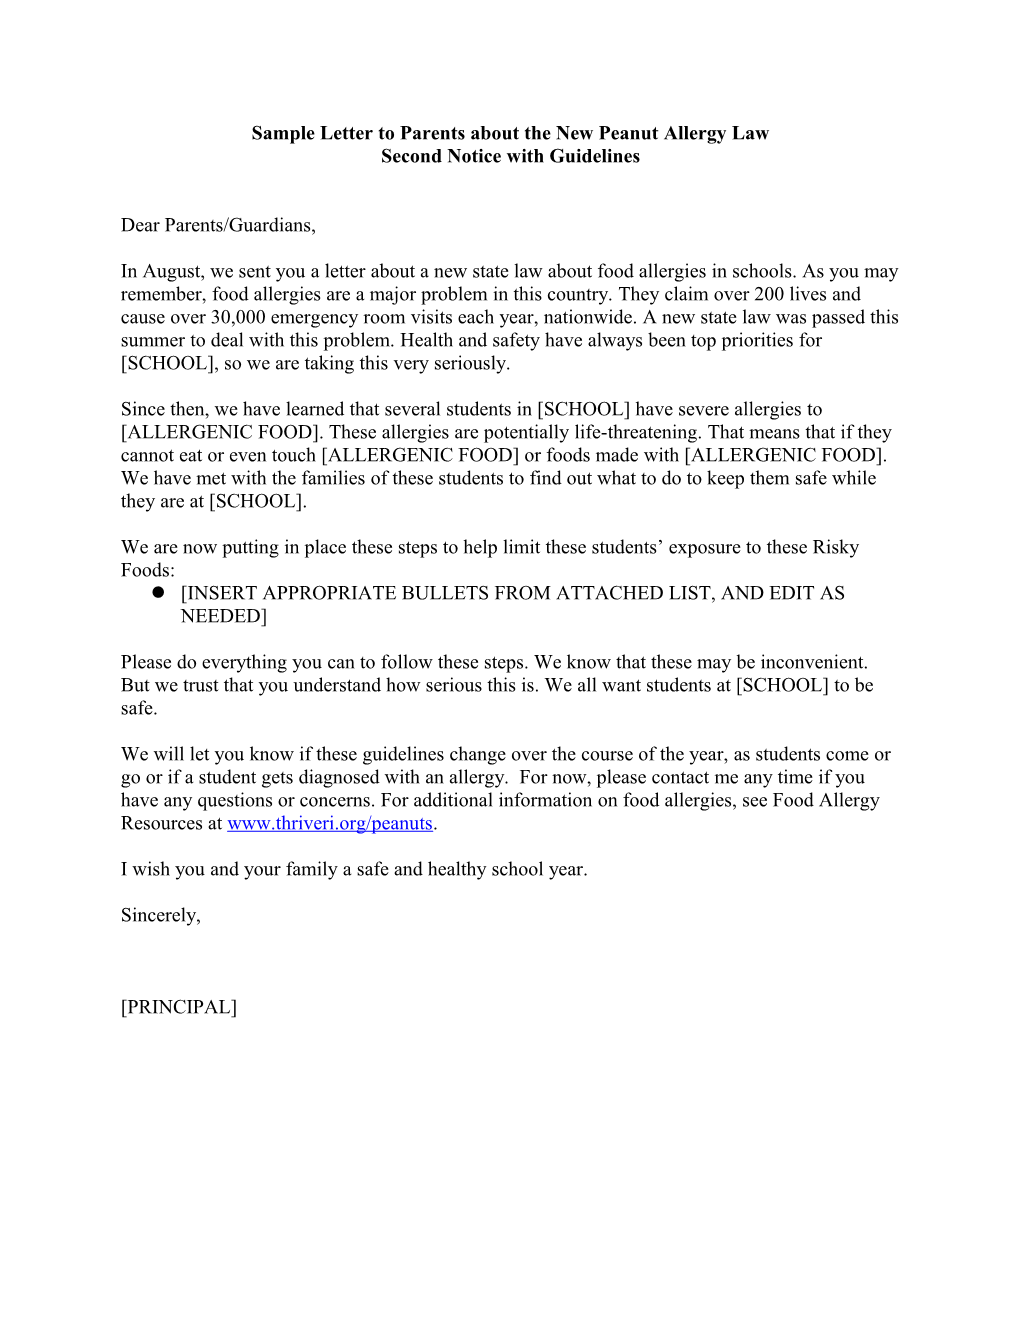 Sample Letter to Parents About the New Peanut Allergy Law